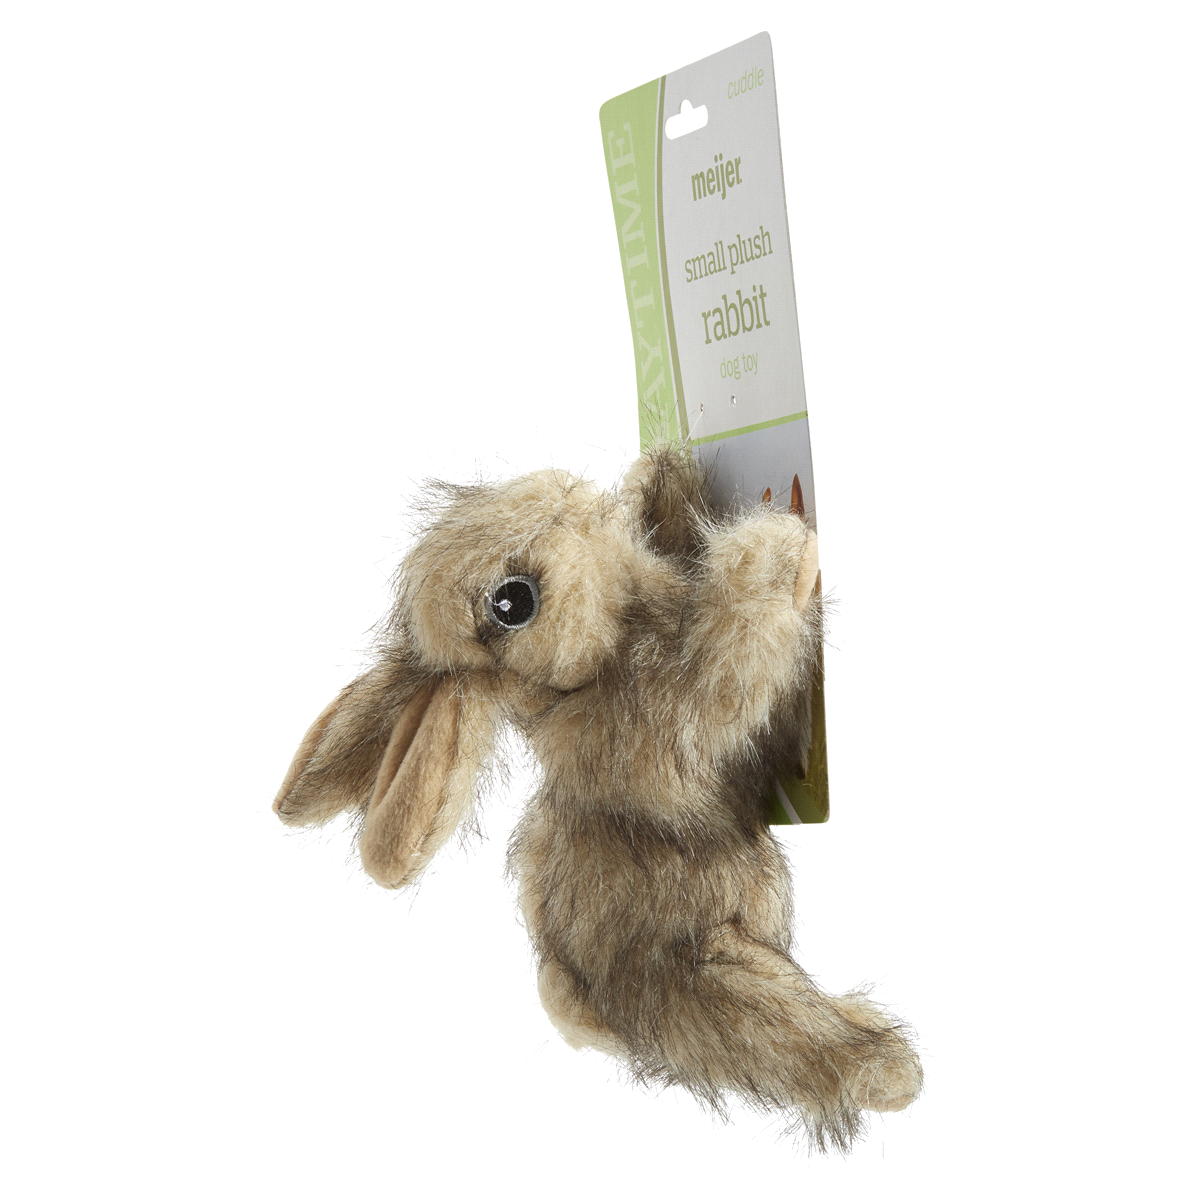 slide 13 of 29, Meijer Realistic Floppy Rabbit Plush Squeaking Dog Toy, 6.5", SMALL     